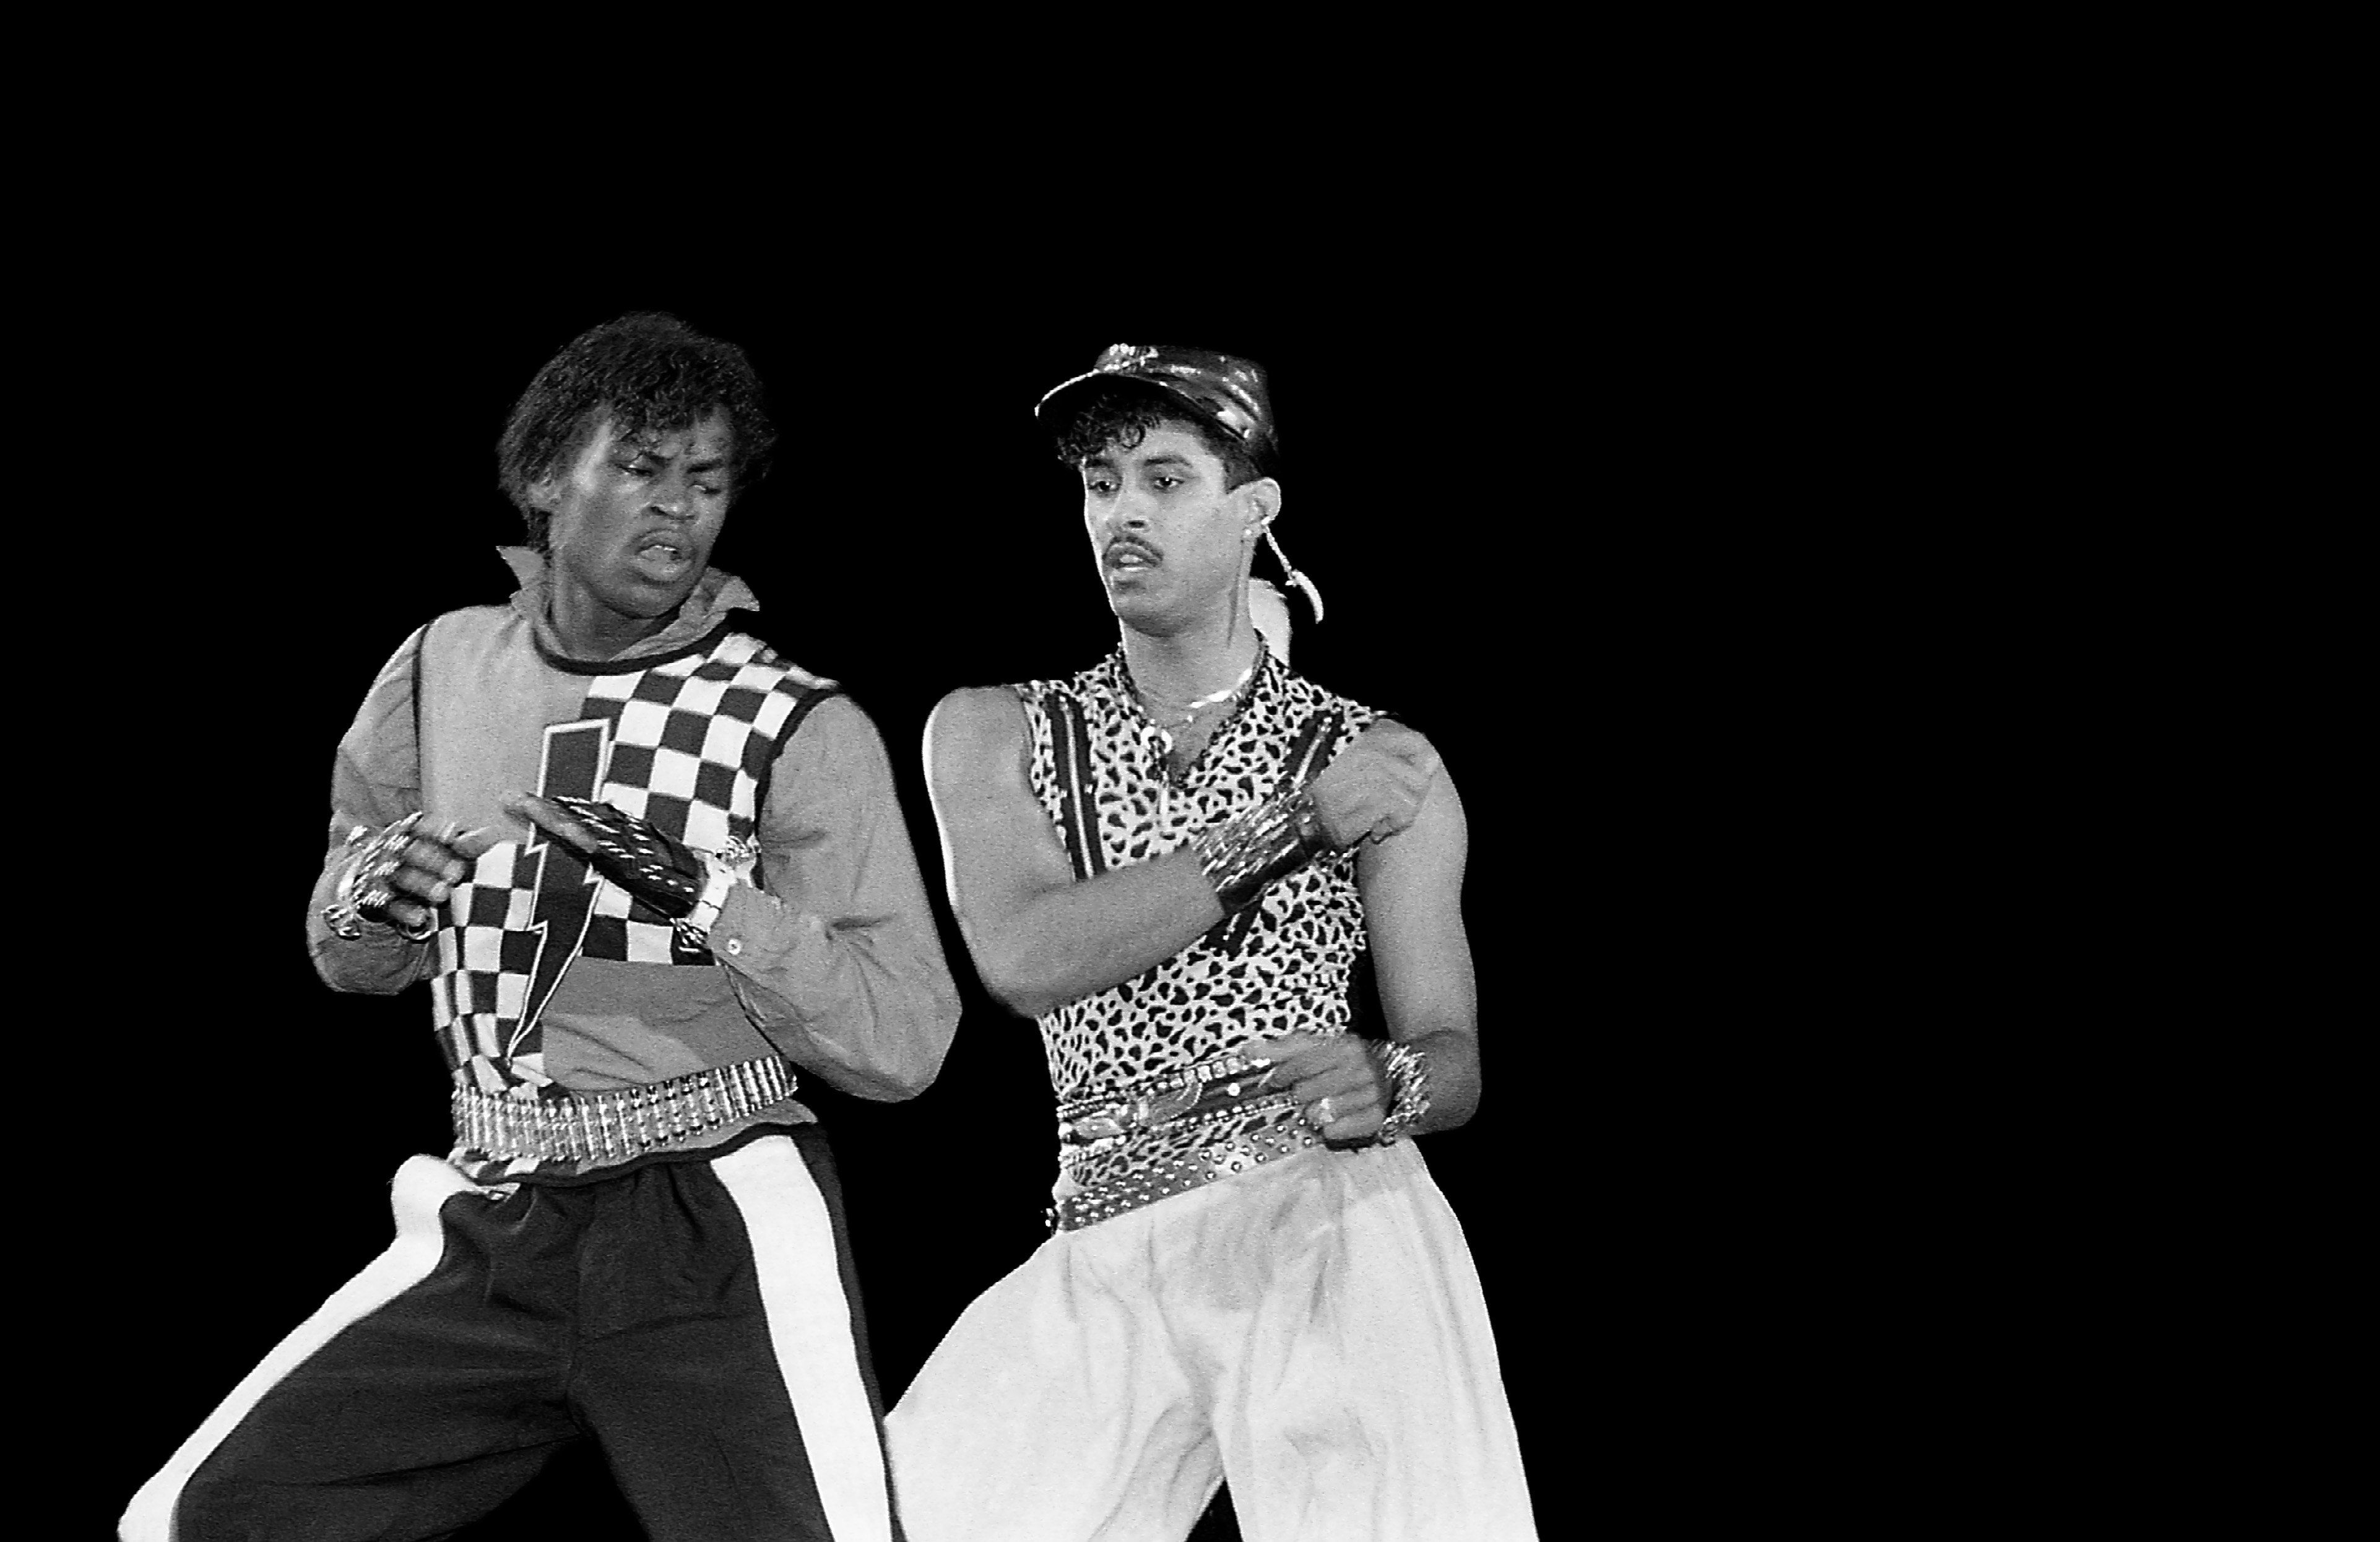 Dancers Boogaloo Shrimp and Shabbadoo, stars of the movie "Breakin'," perform at the U.I.C. Pavilion in Chicago in October 1985.